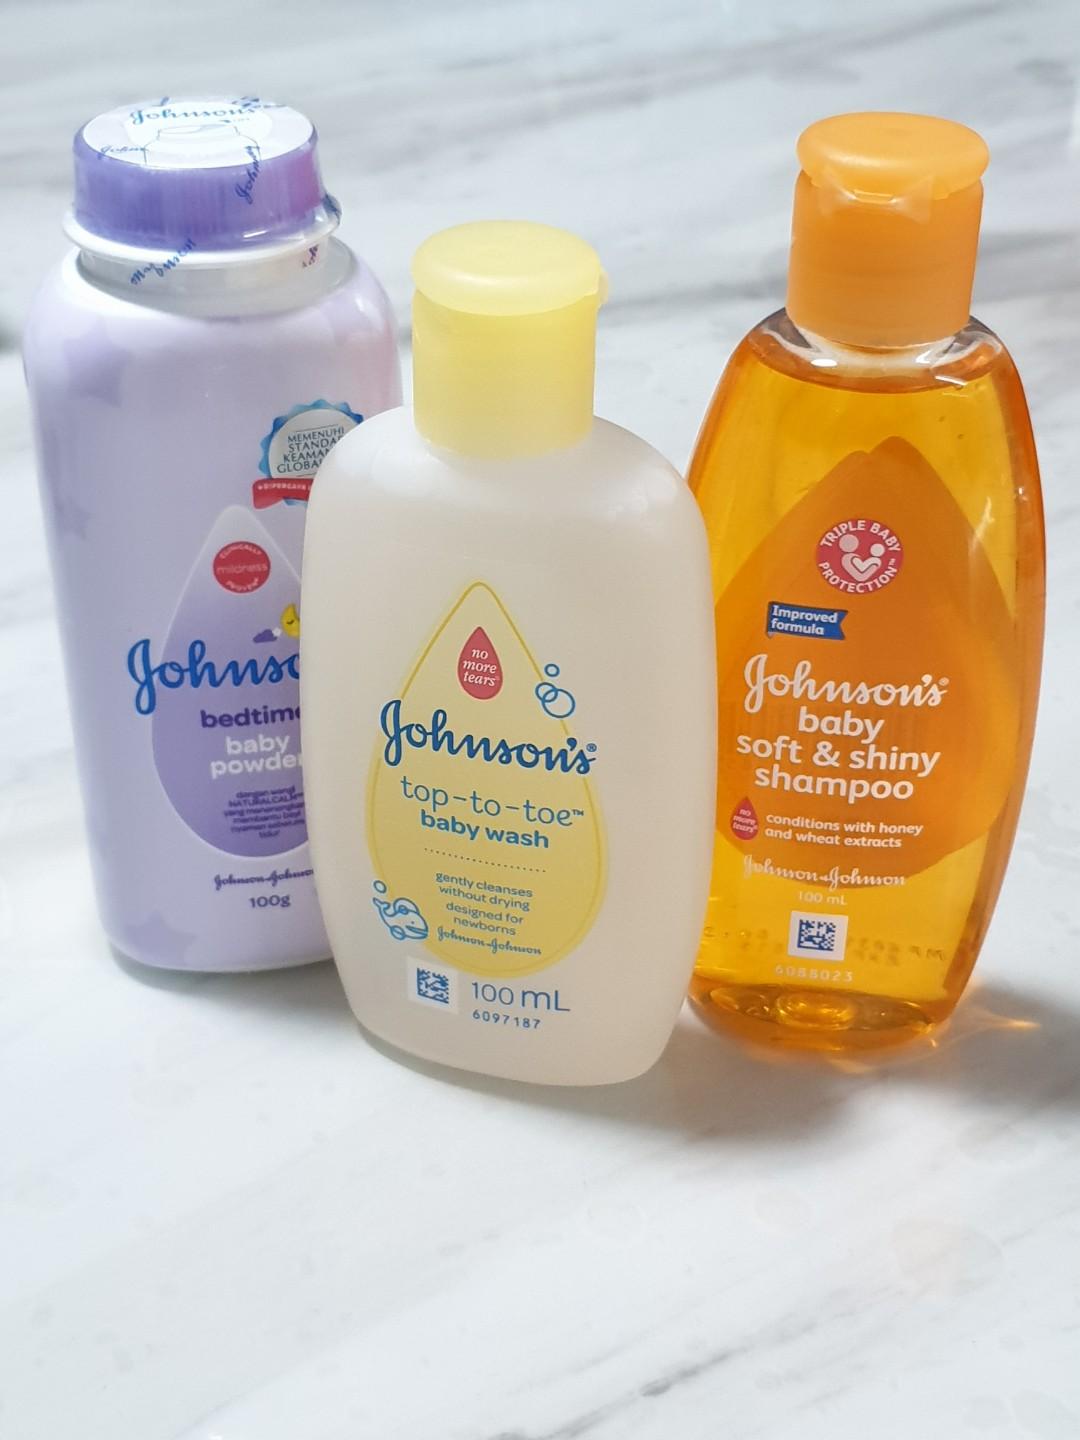 johnson baby products for newborn